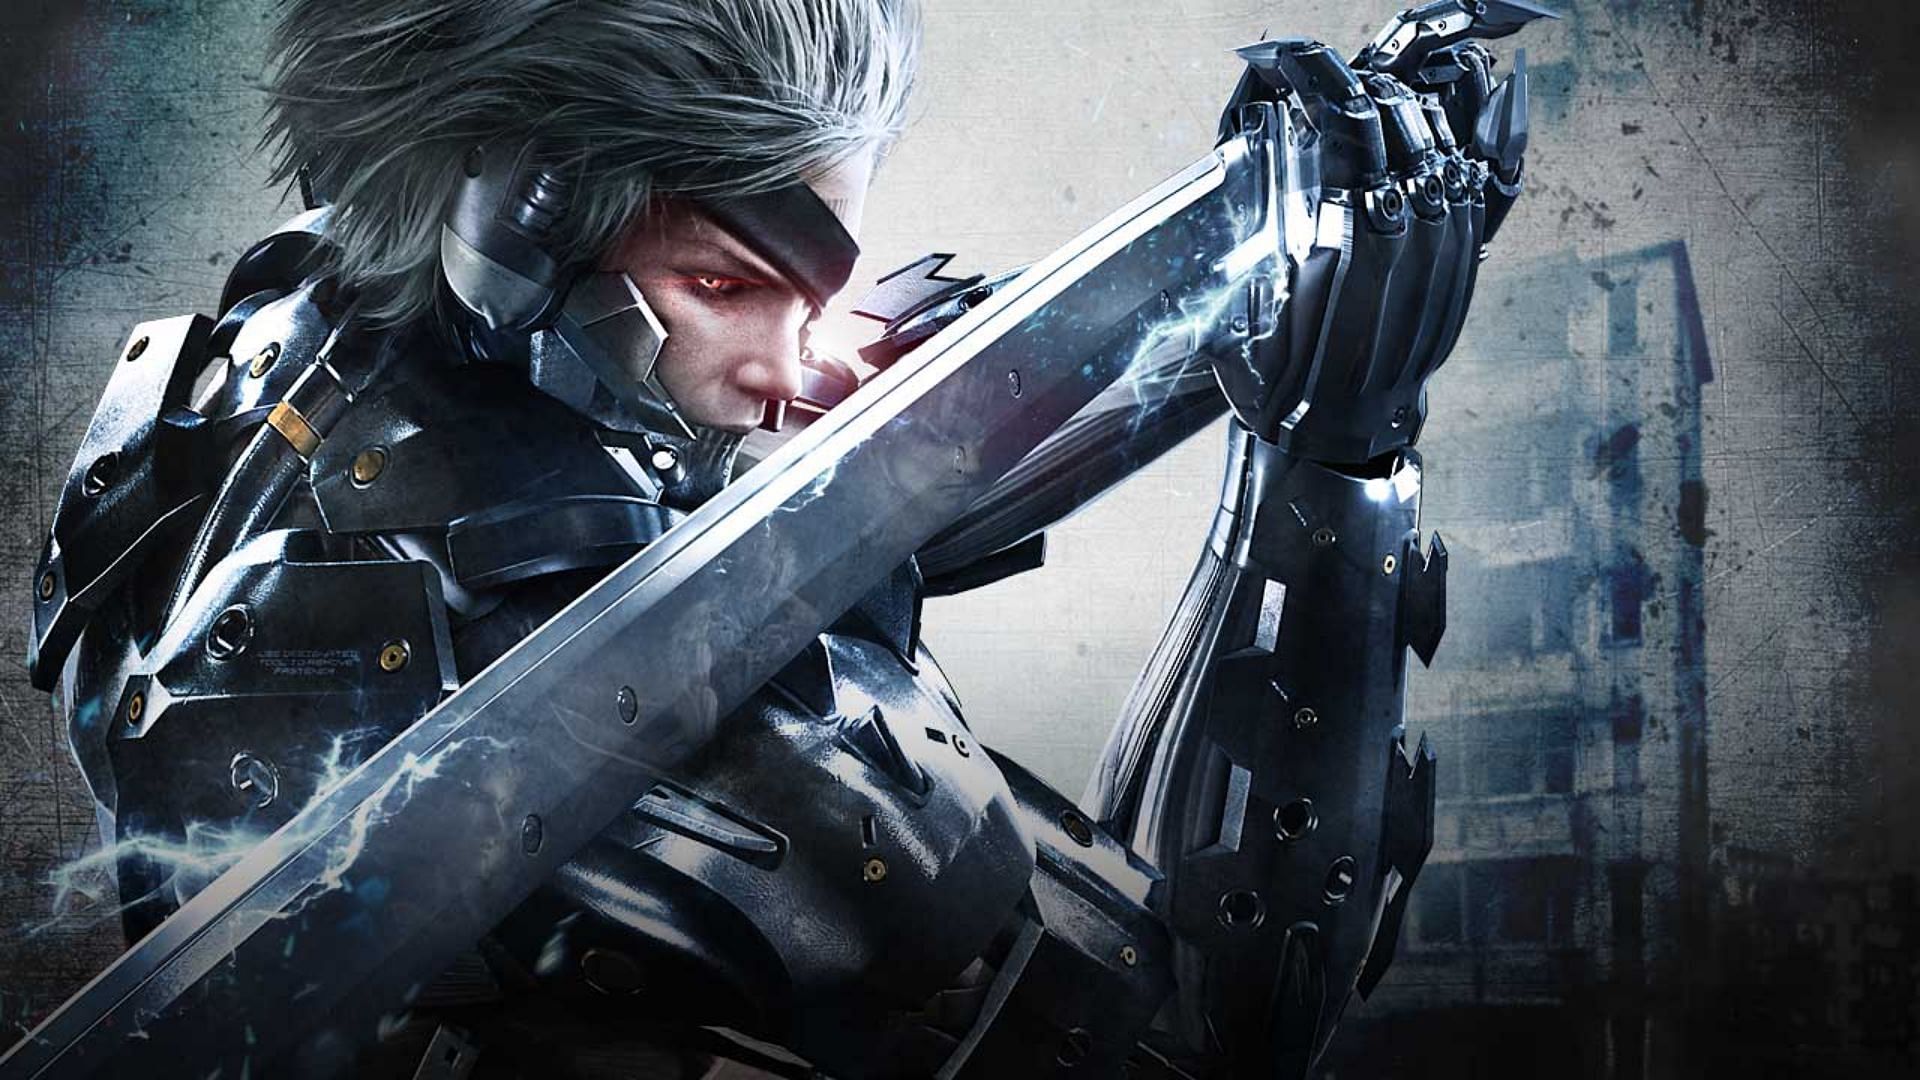 Fortnite community wants MGR Style for Raiden Outfit